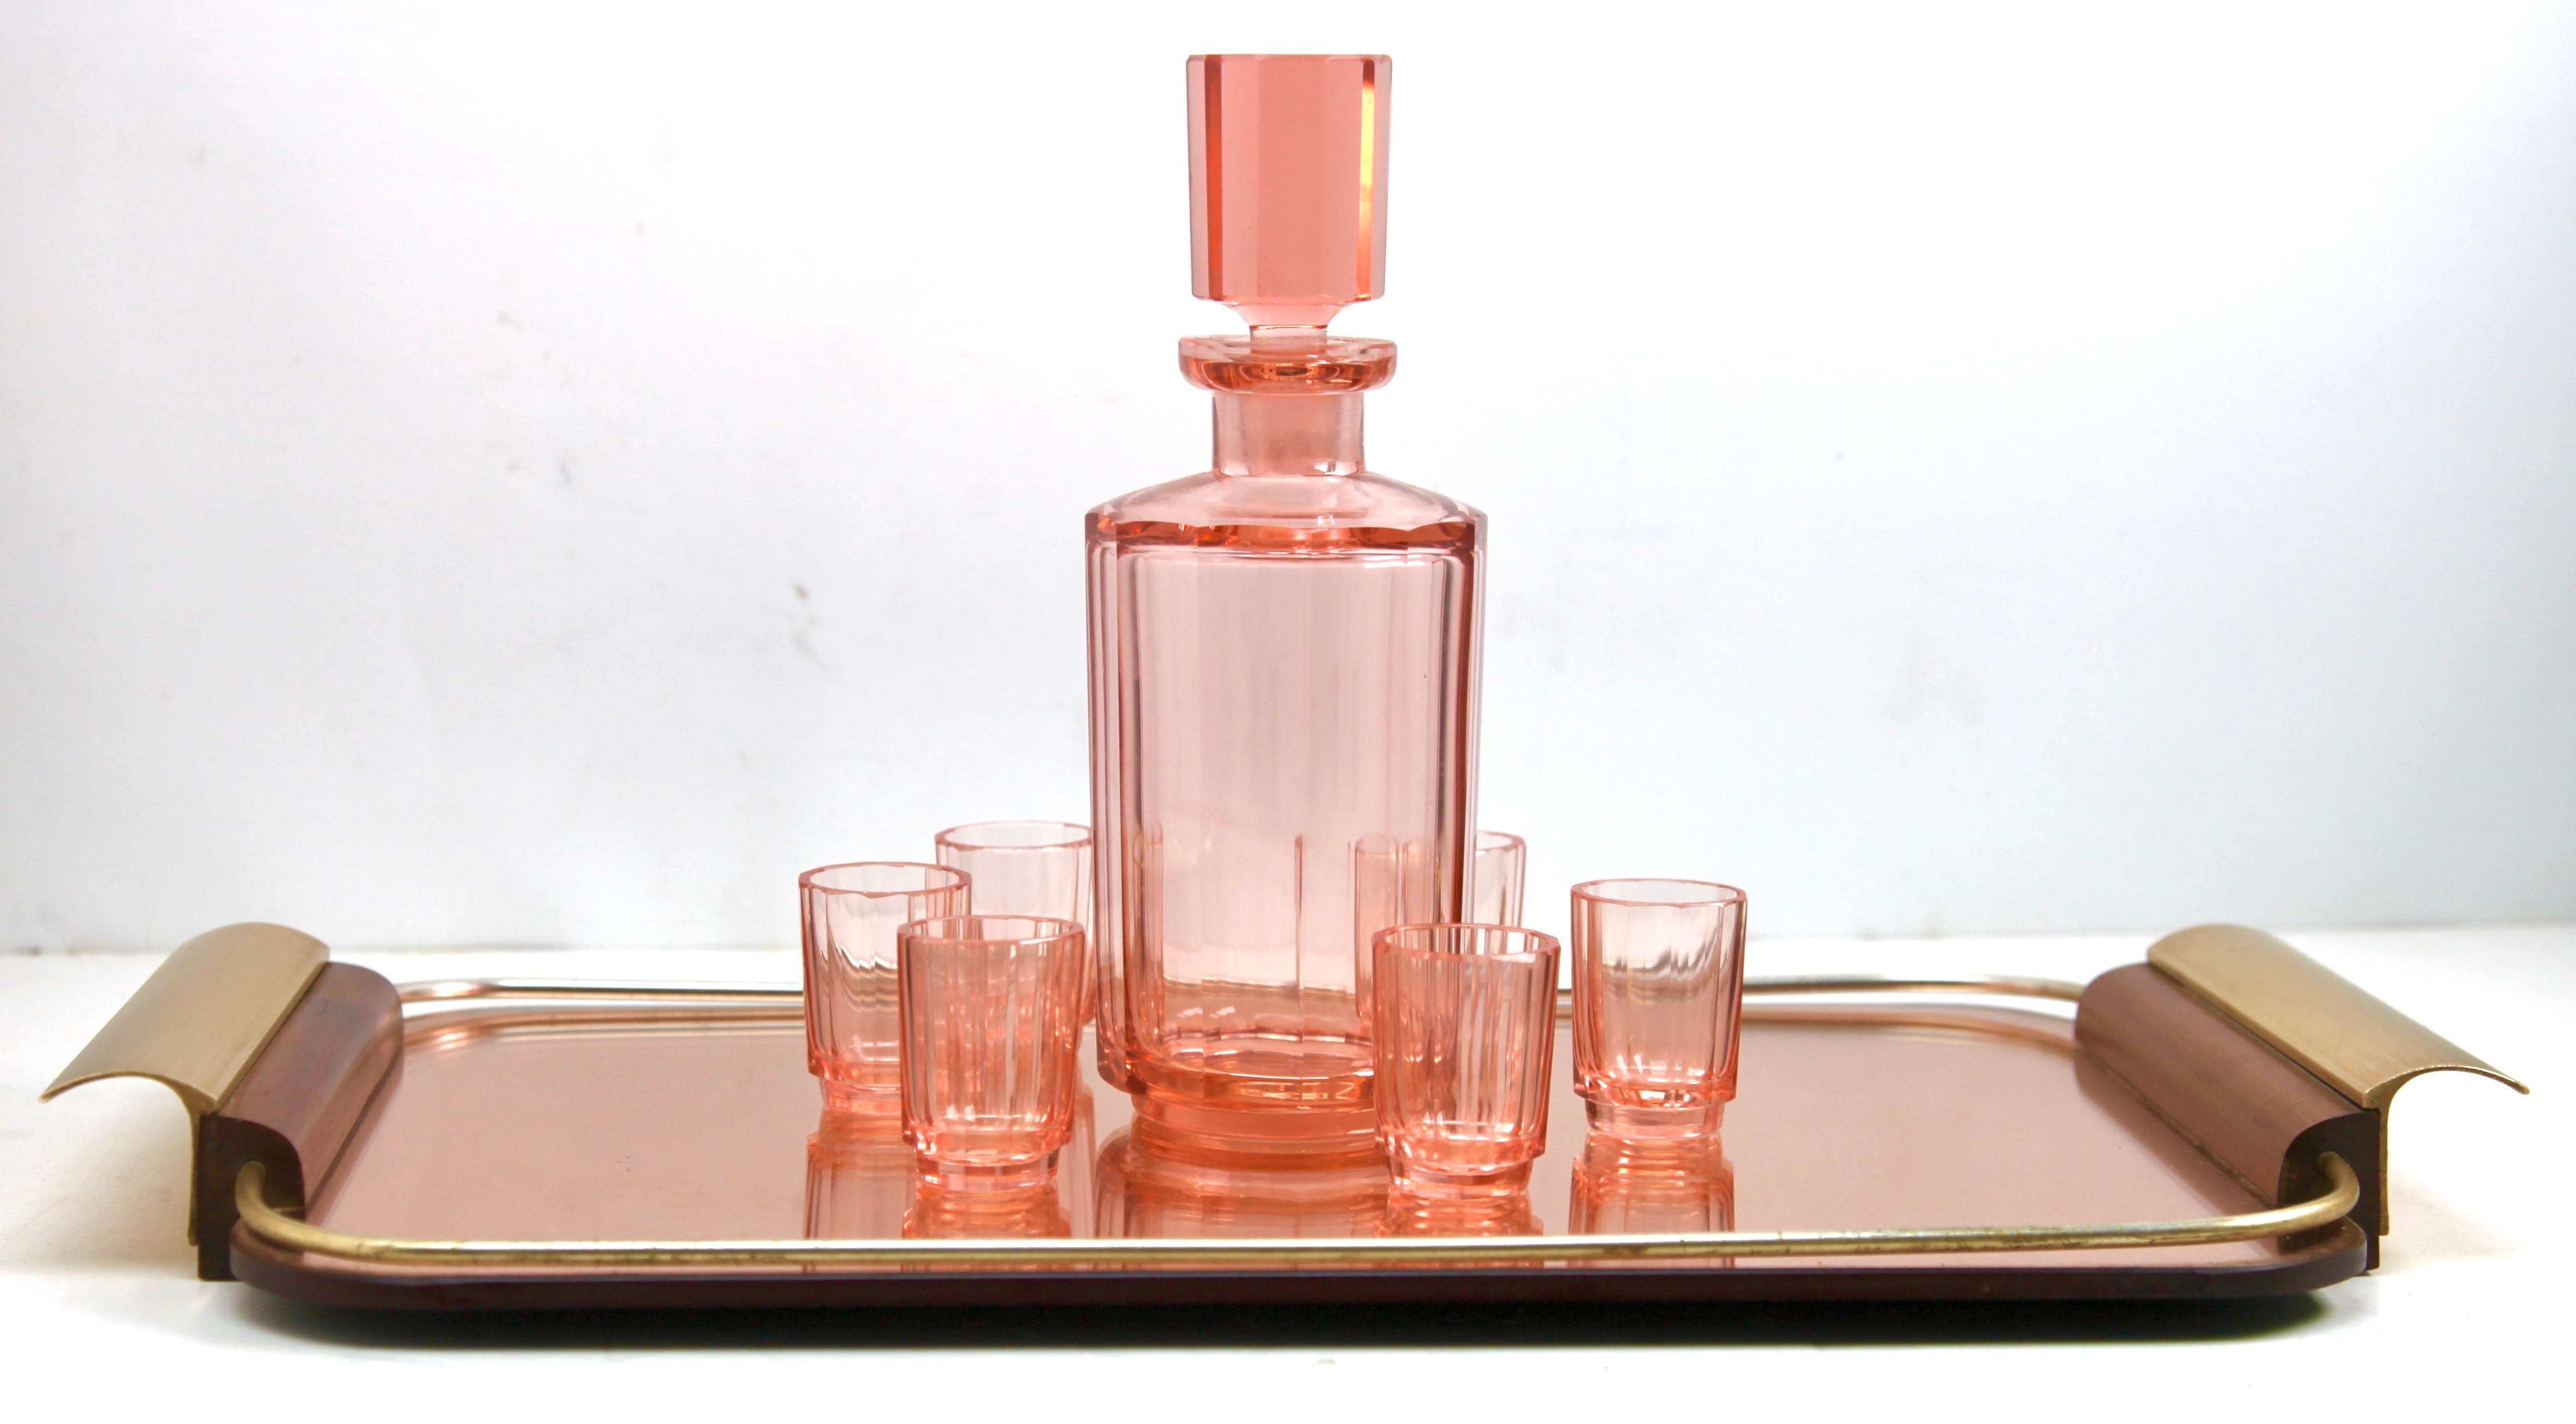 Set with crystal decanter and shot glasses and serving tray with mirror.

Size decanter: 
Height 23 cm / 9.05 inch, diameter 9 cm / 3.54
Size tray: 50 cm / 19.68 inch x 27 cm / 10.62 inch x 5cm / 1.96 inch.